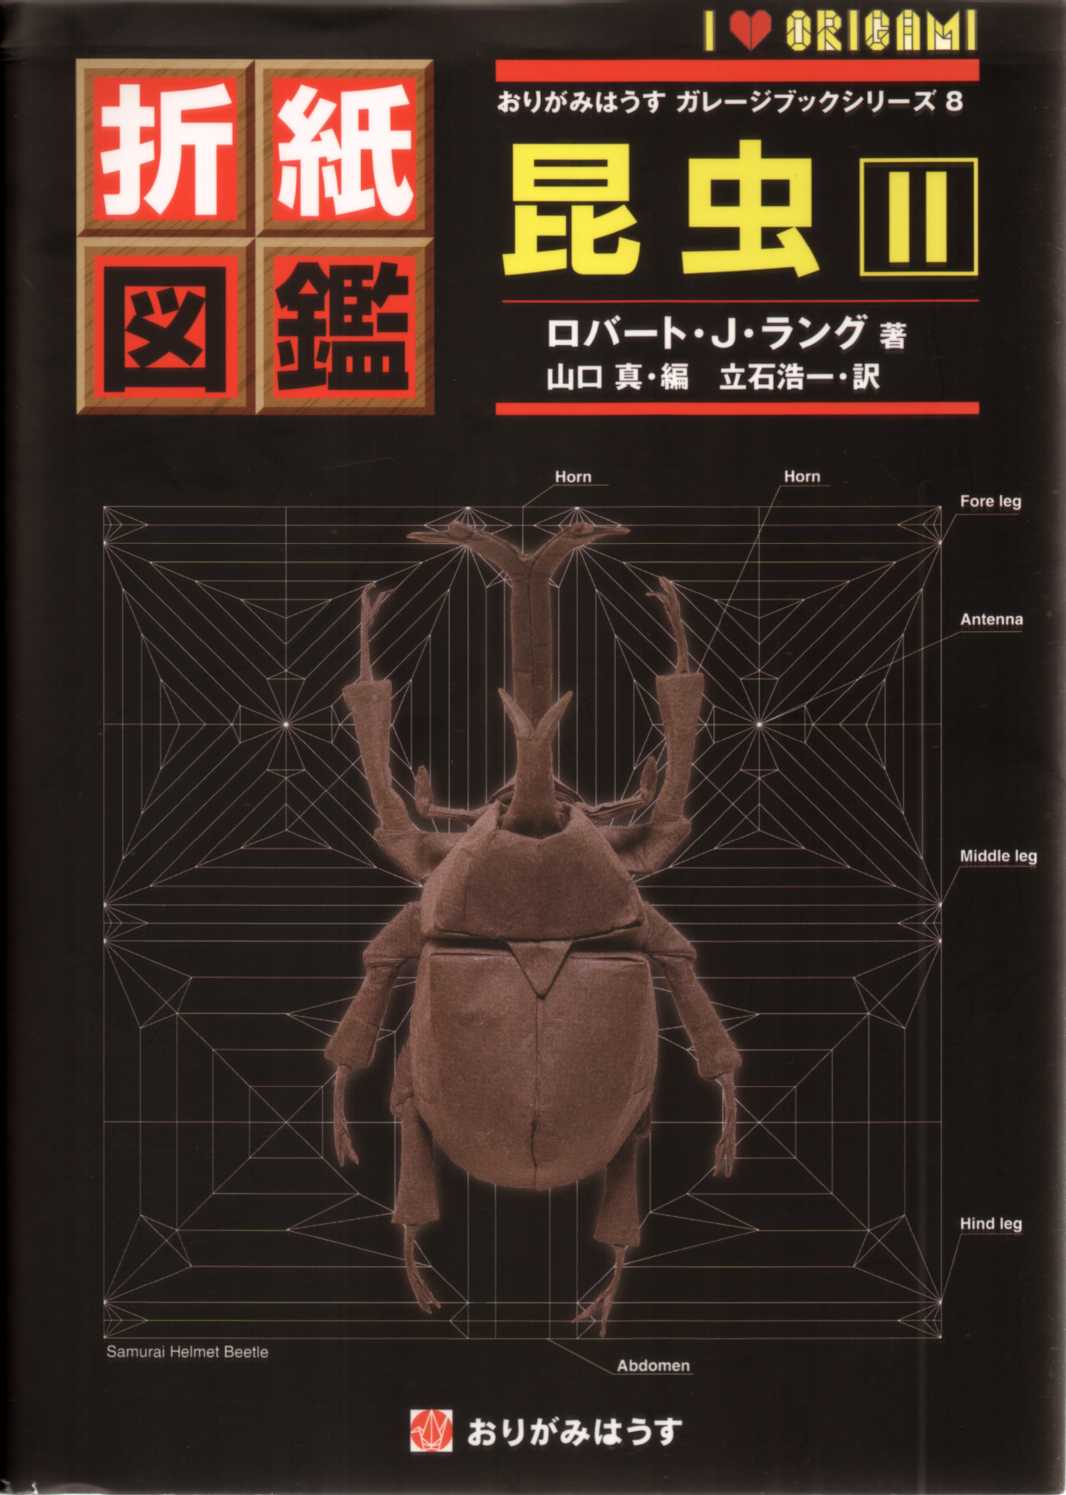 Origami Insects II / 折紙図鑑　昆虫・2 : page 66.